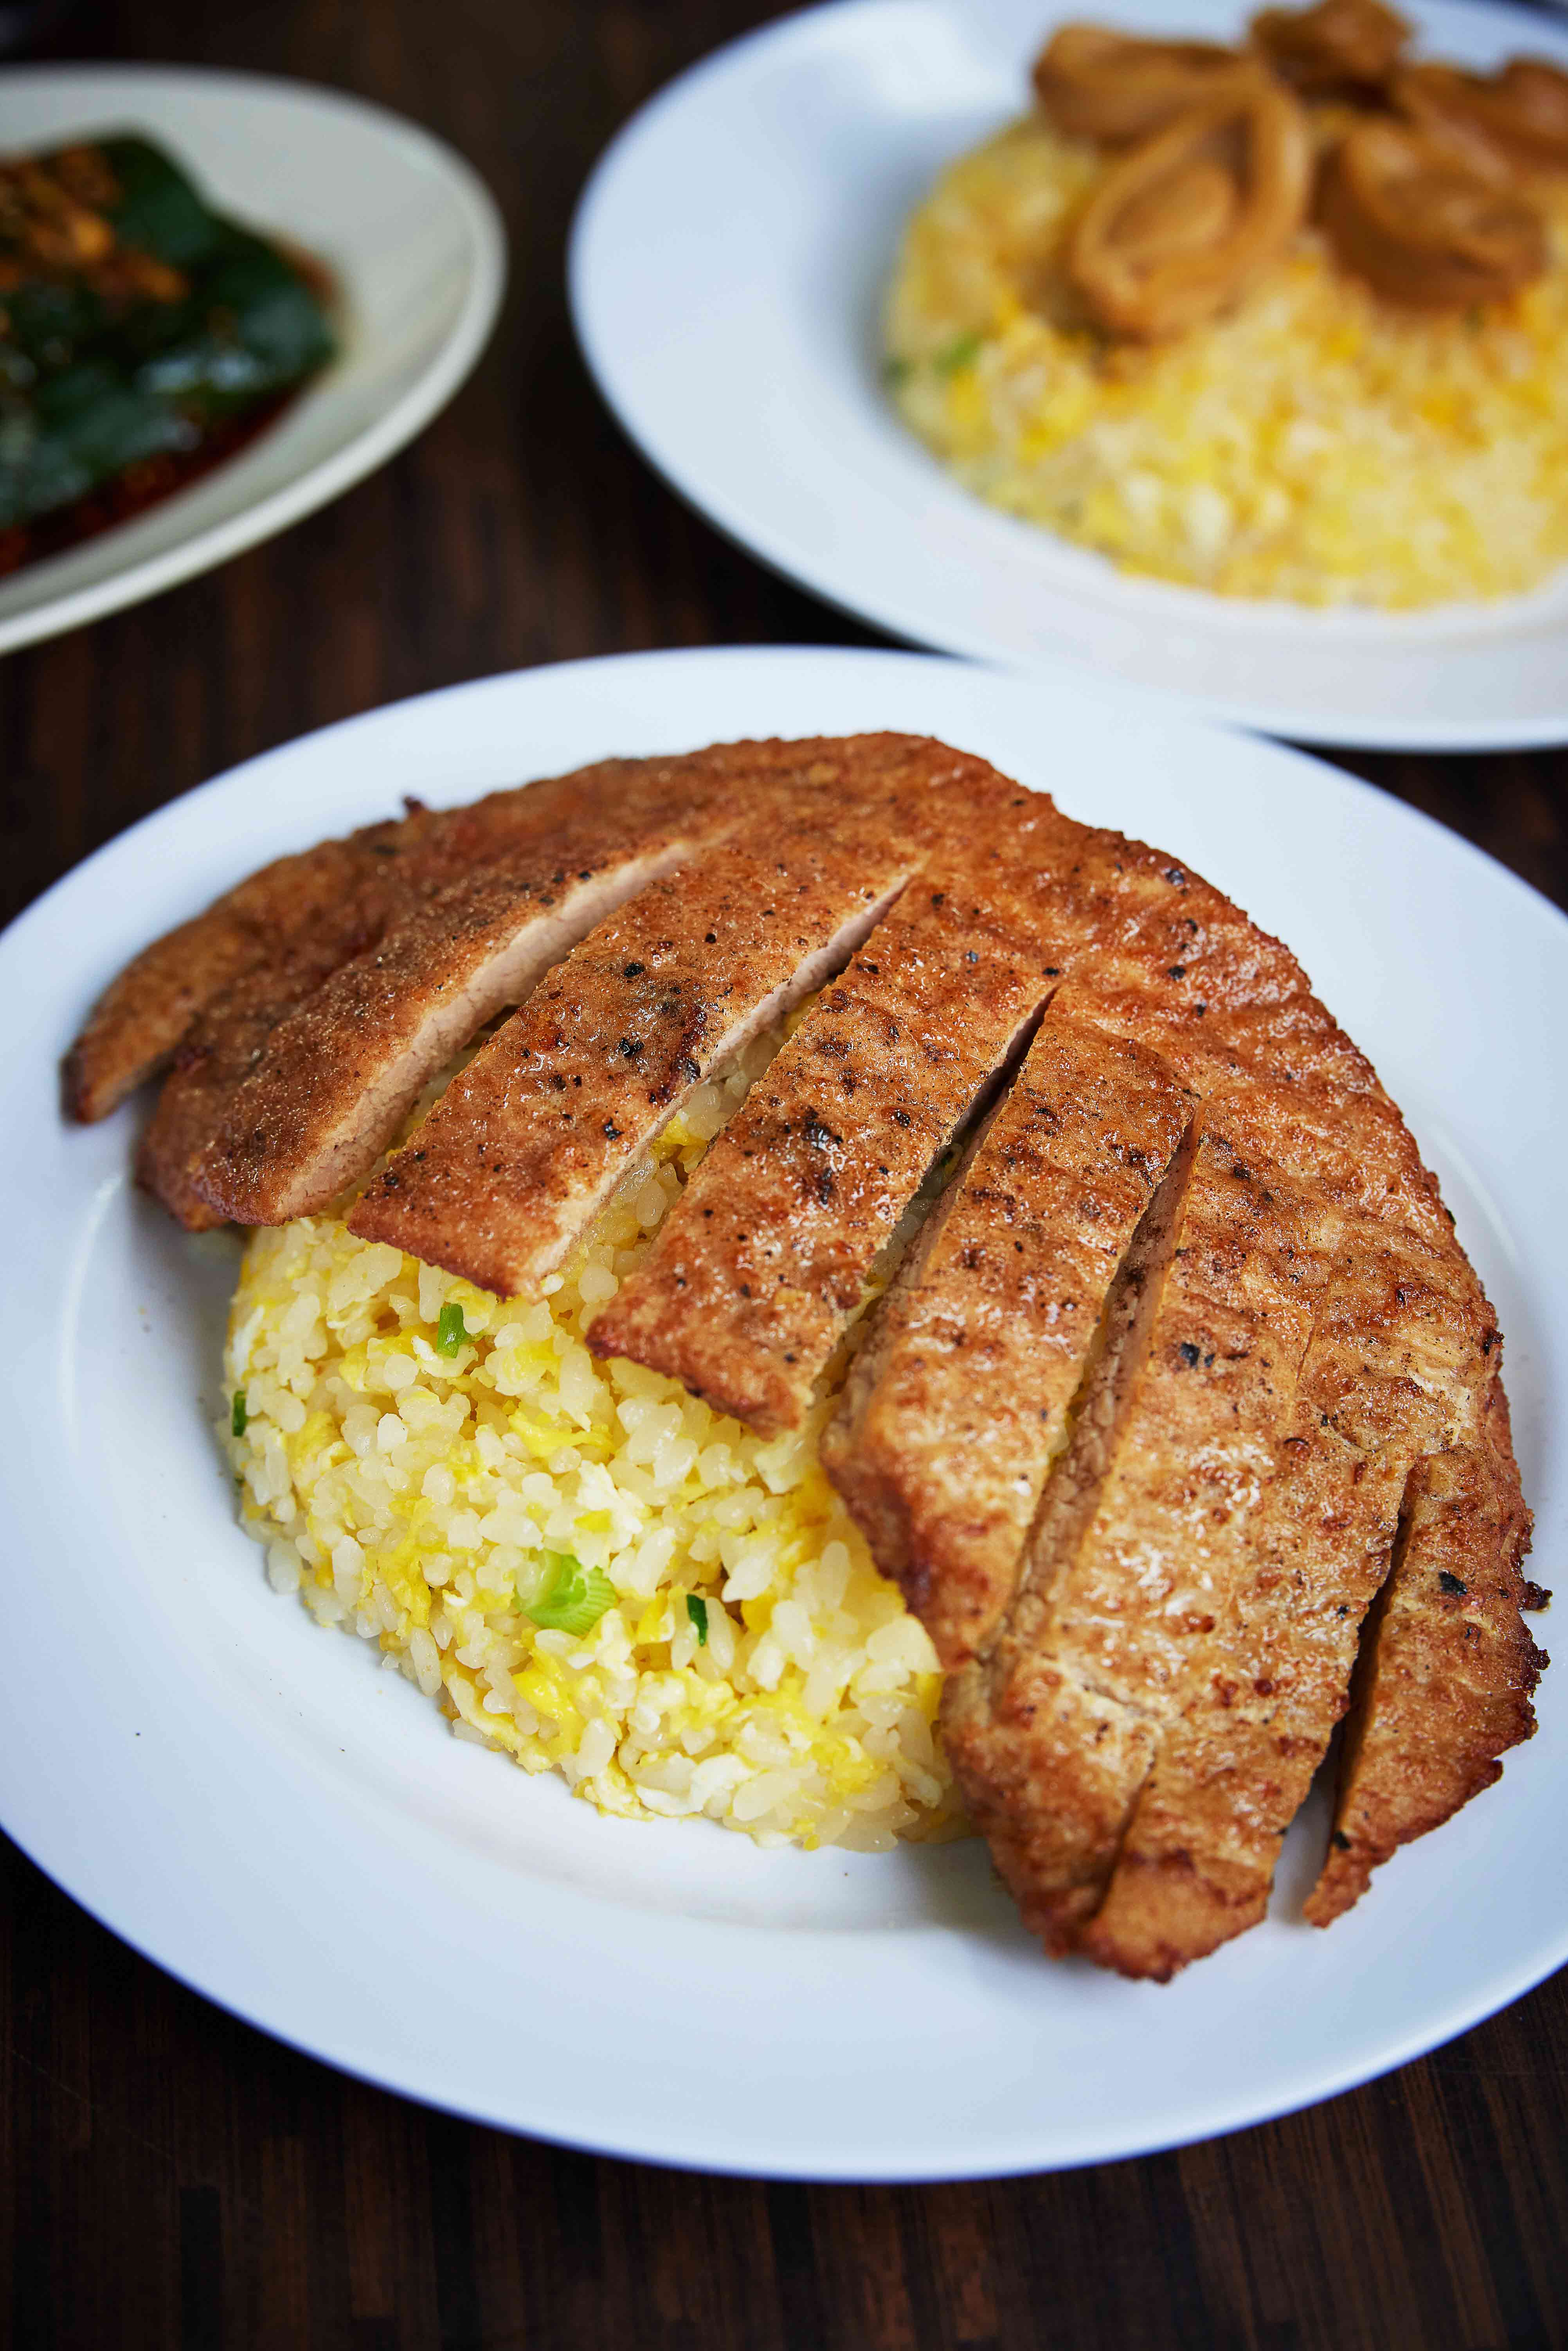 The Signature Egg Fried Rice, from $4 (8 DAYS Pick!)